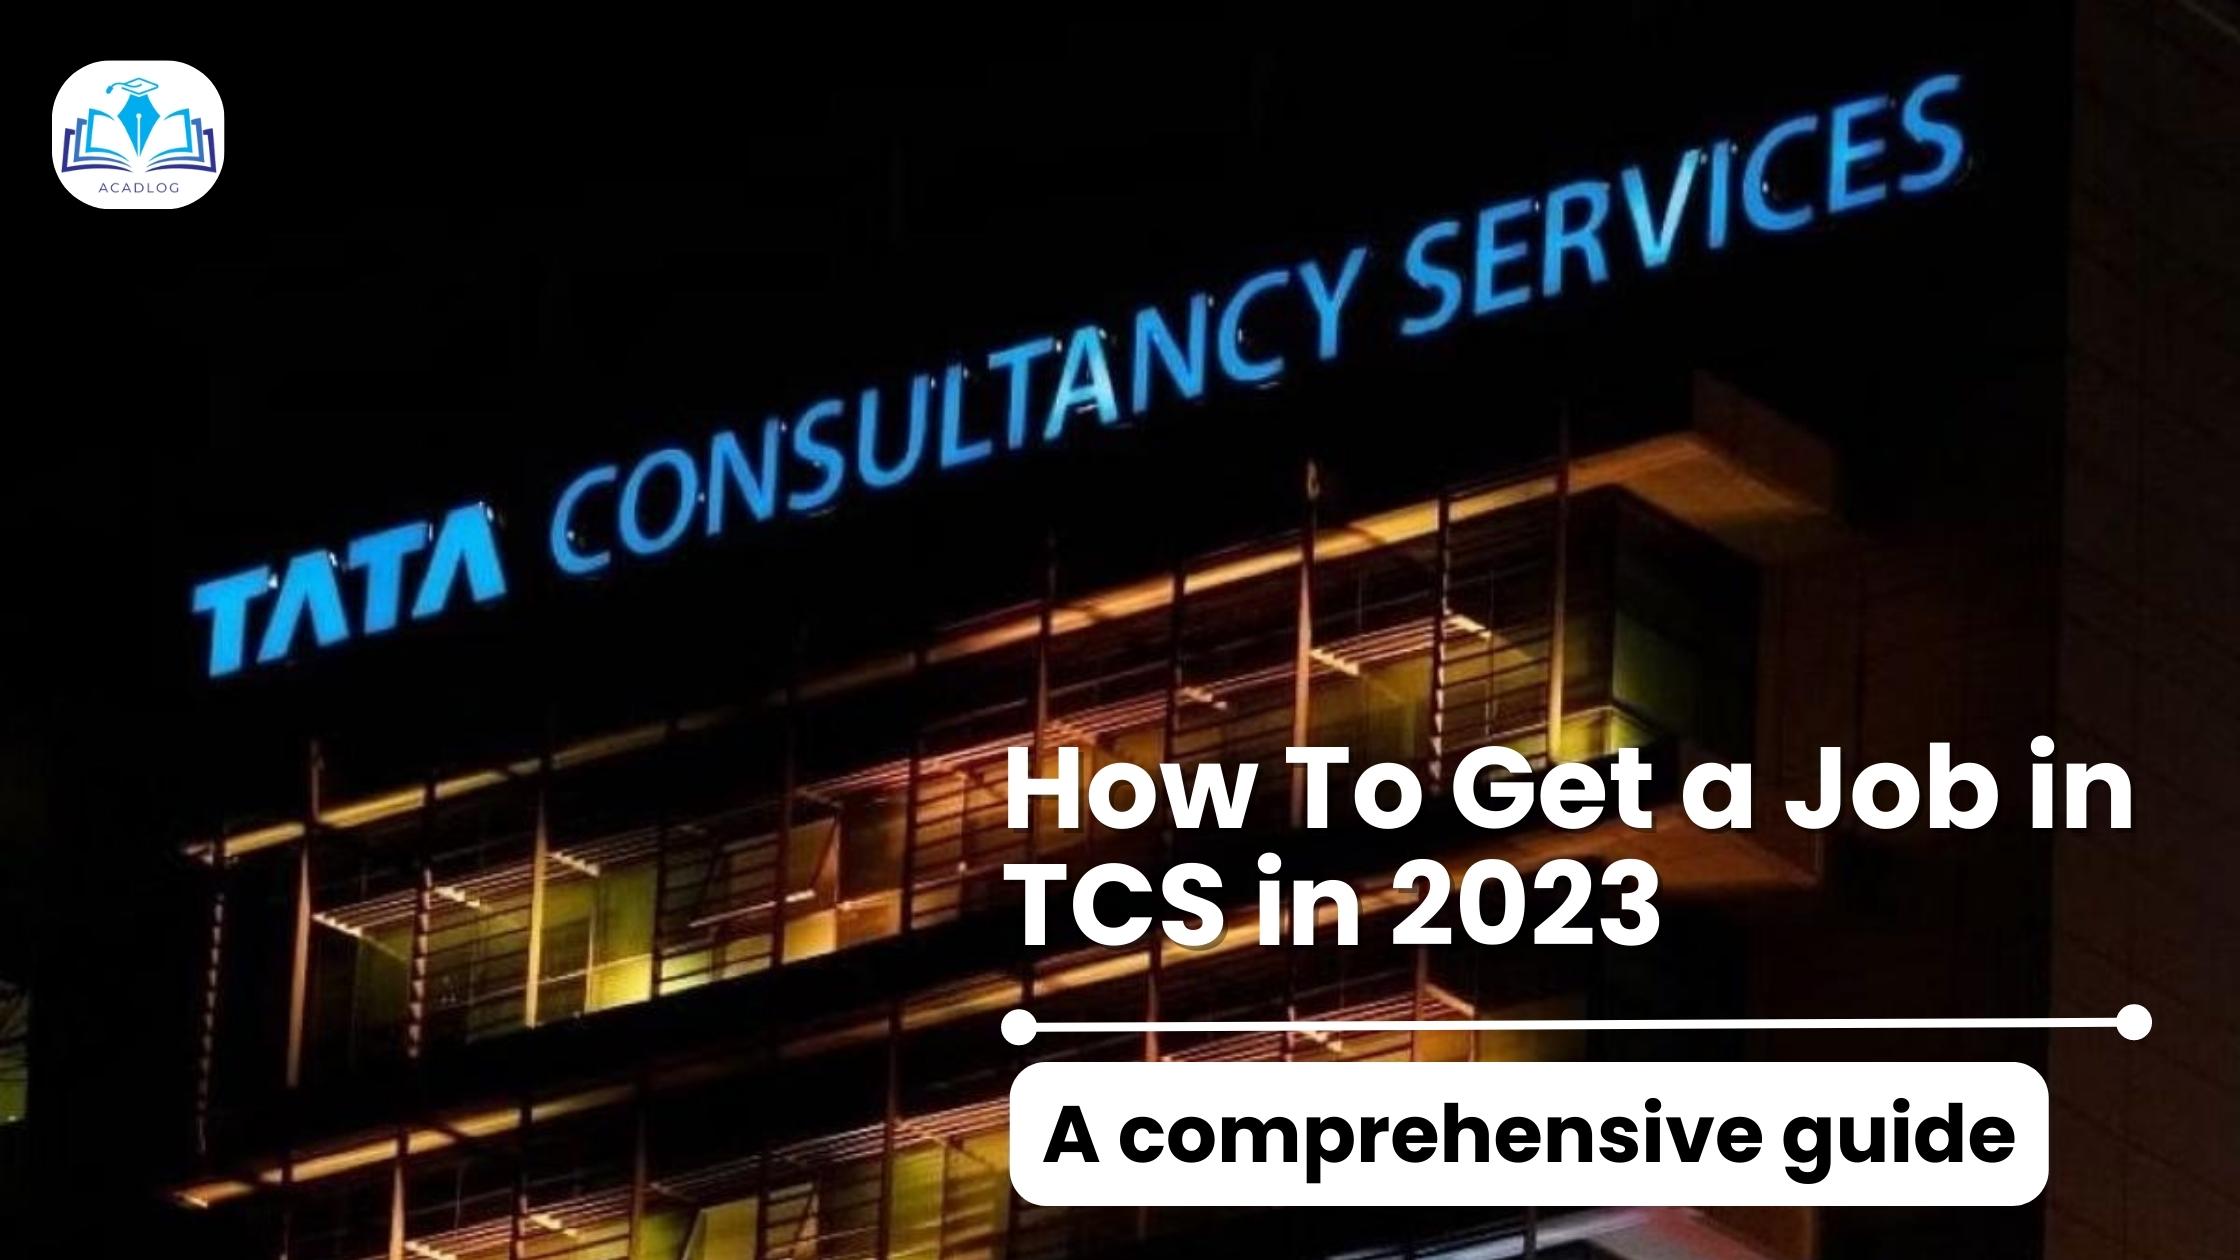 How To Get a Job in TCS